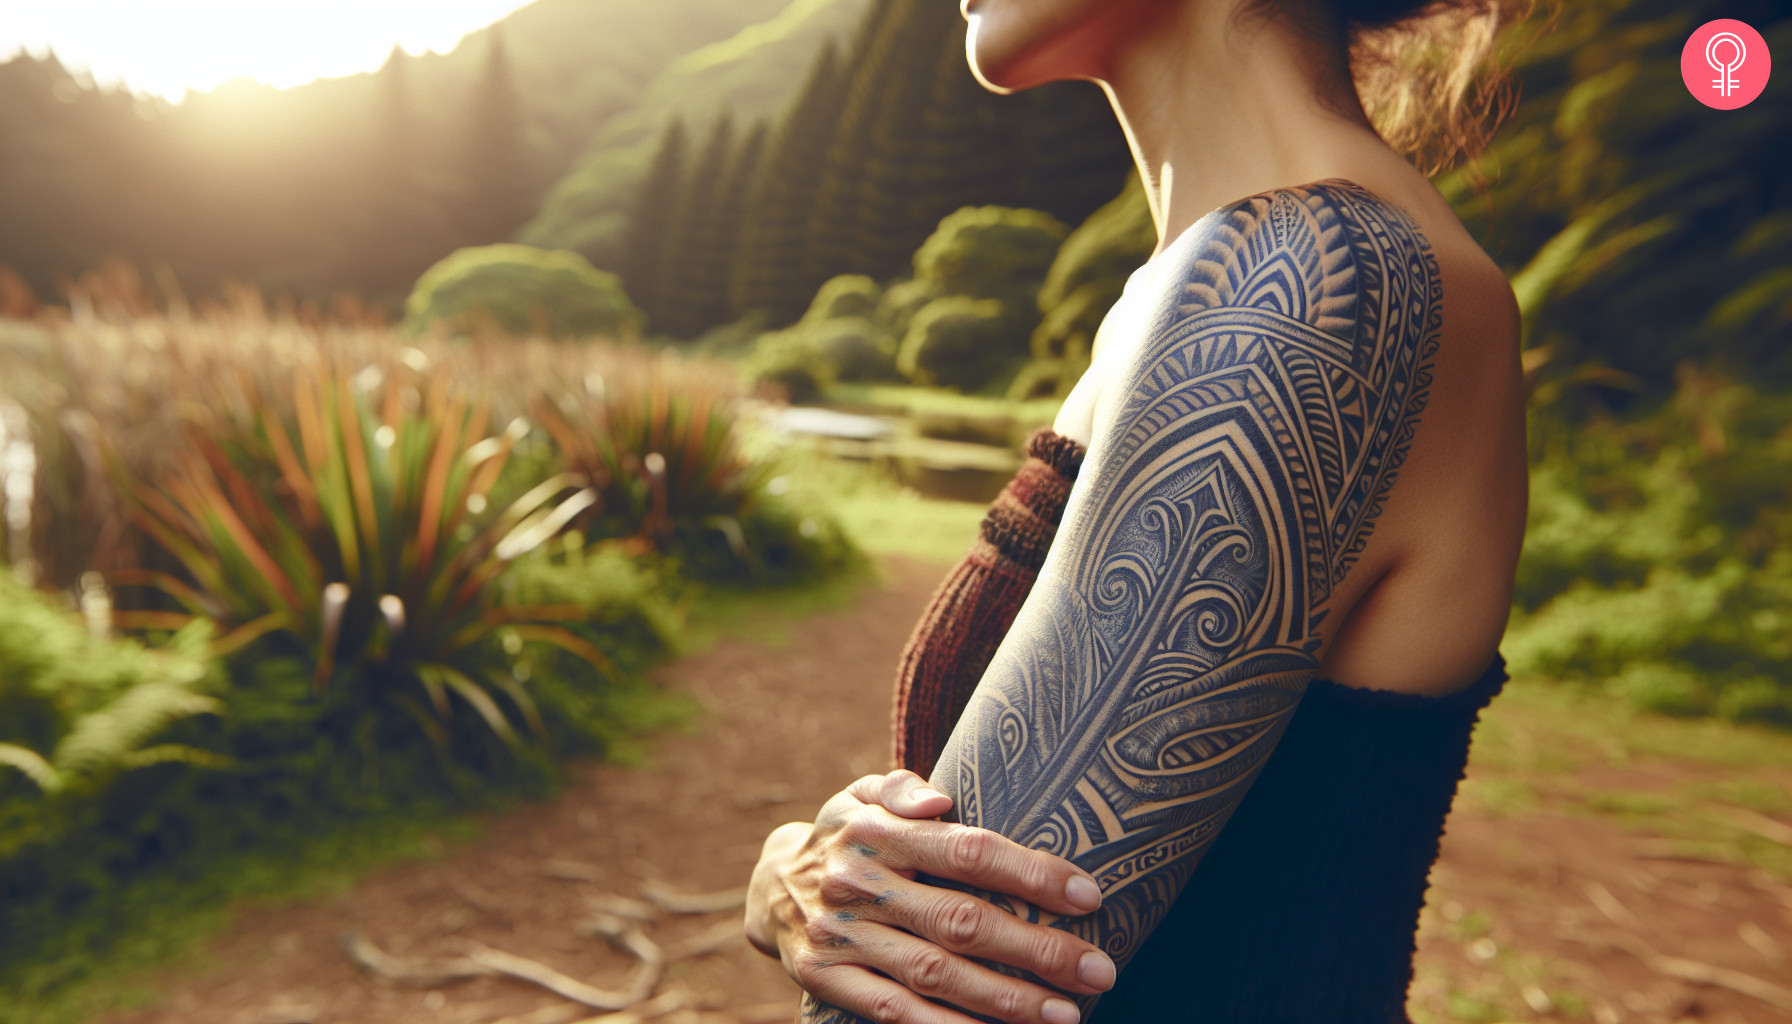 Mid-length maori tattoo design on the upper arm of a woman